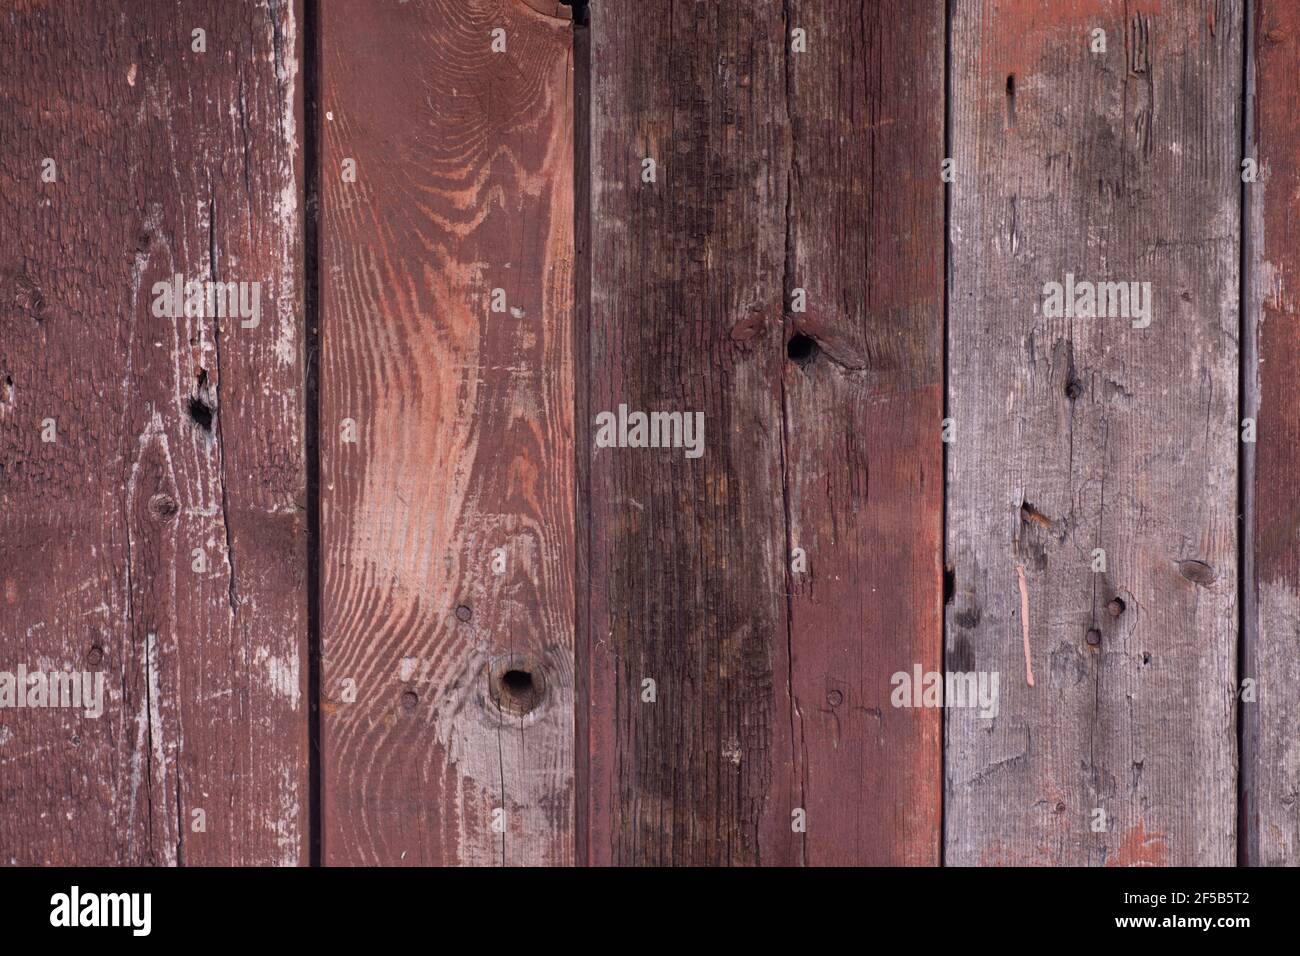 Wood plank wall background. Texture of natural brown wooden boards. Modern  building exterior design Stock Photo - Alamy